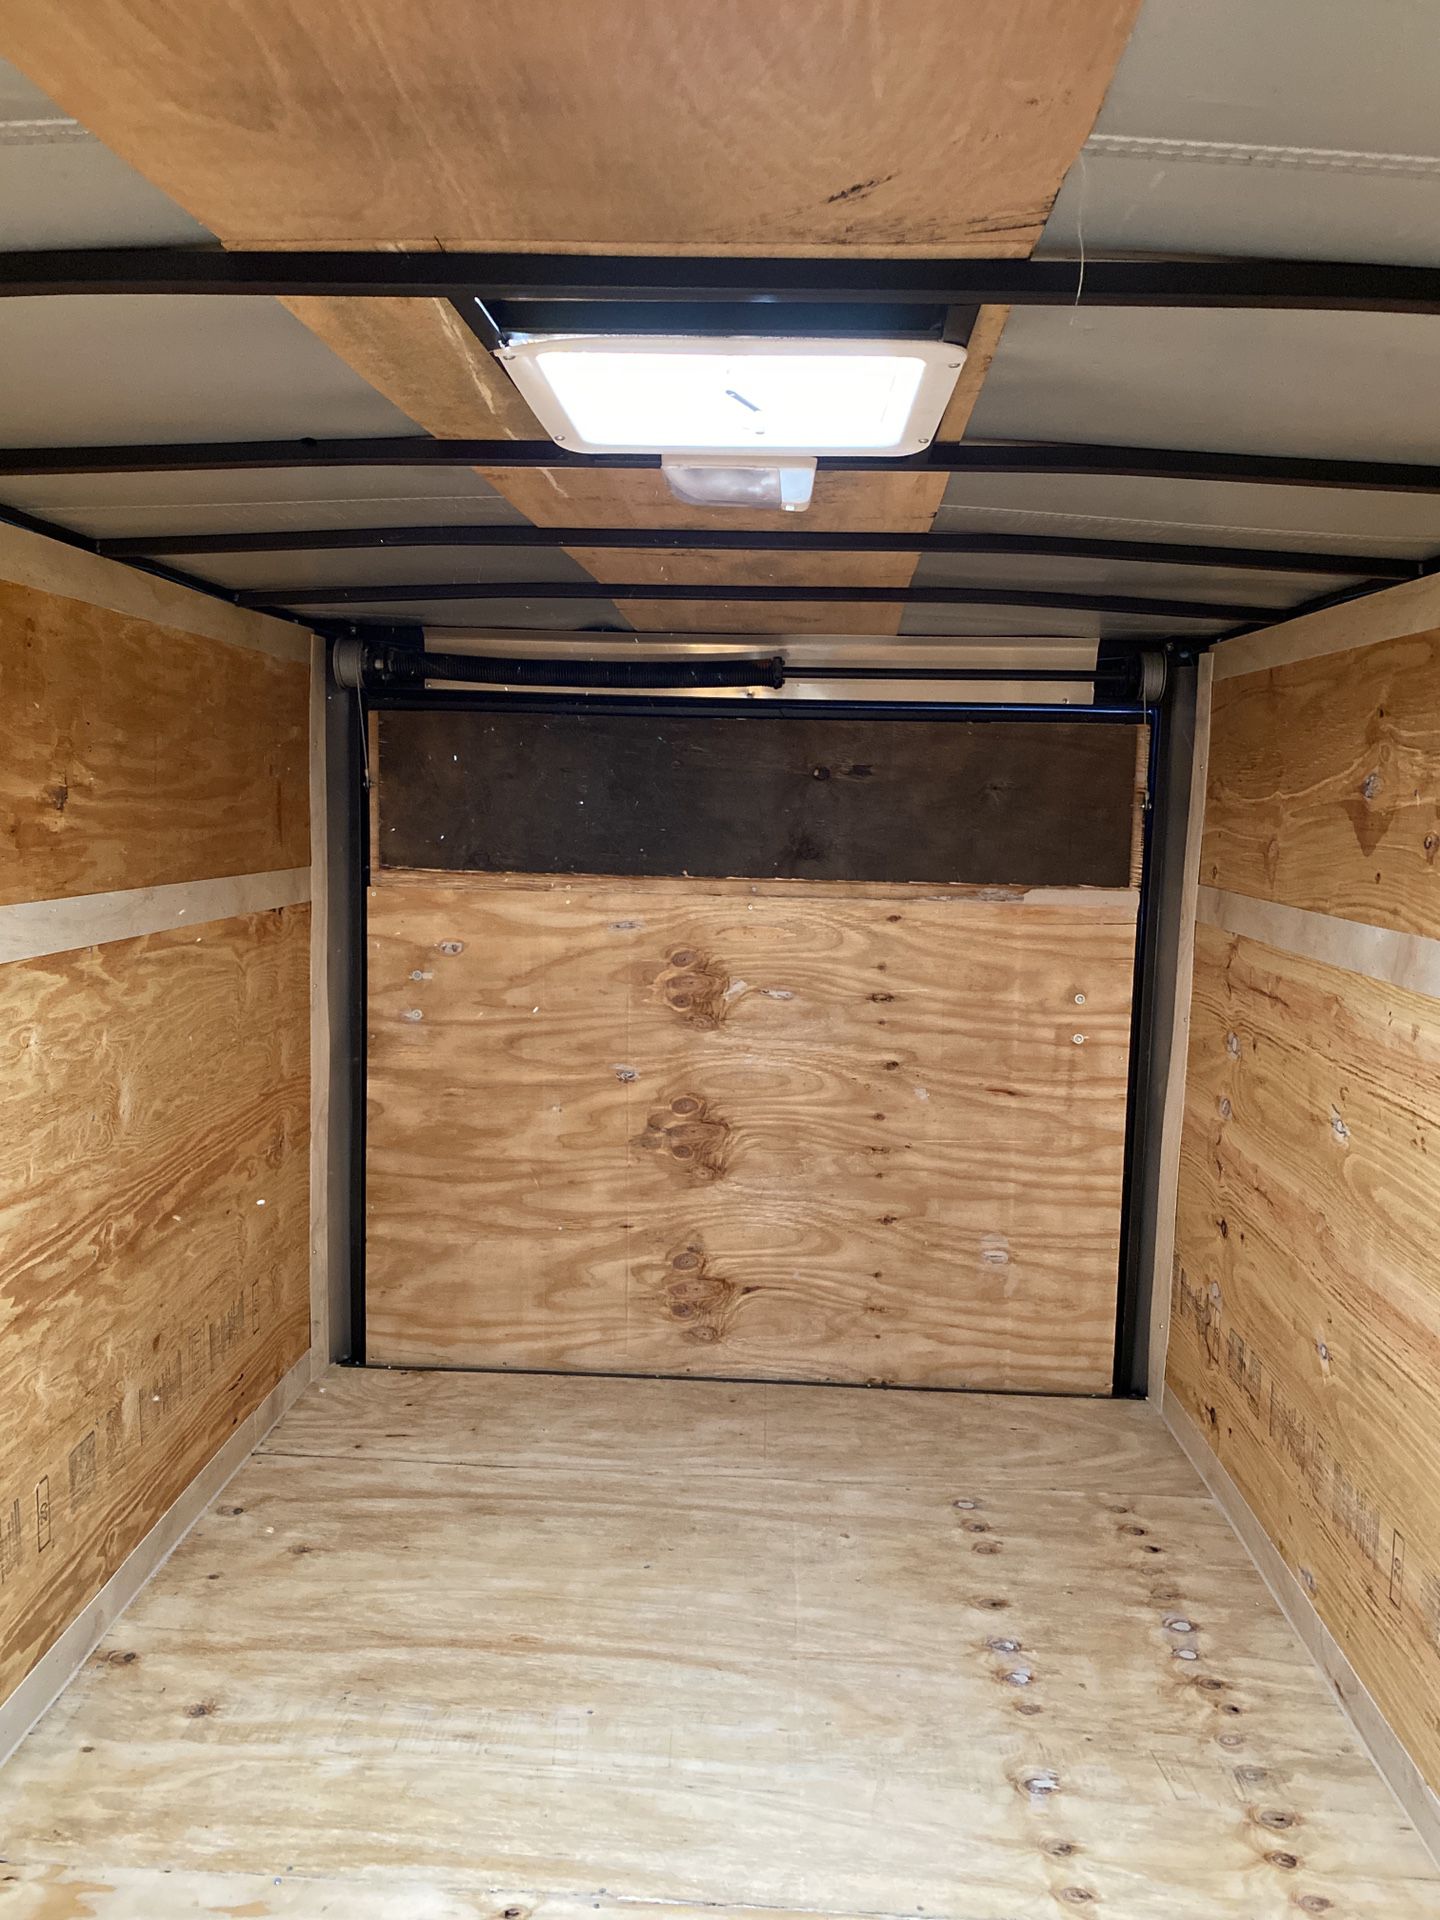 brand new enclosed trailer 7x14TA2 in blackout edition with warranty ready for you to start your new business